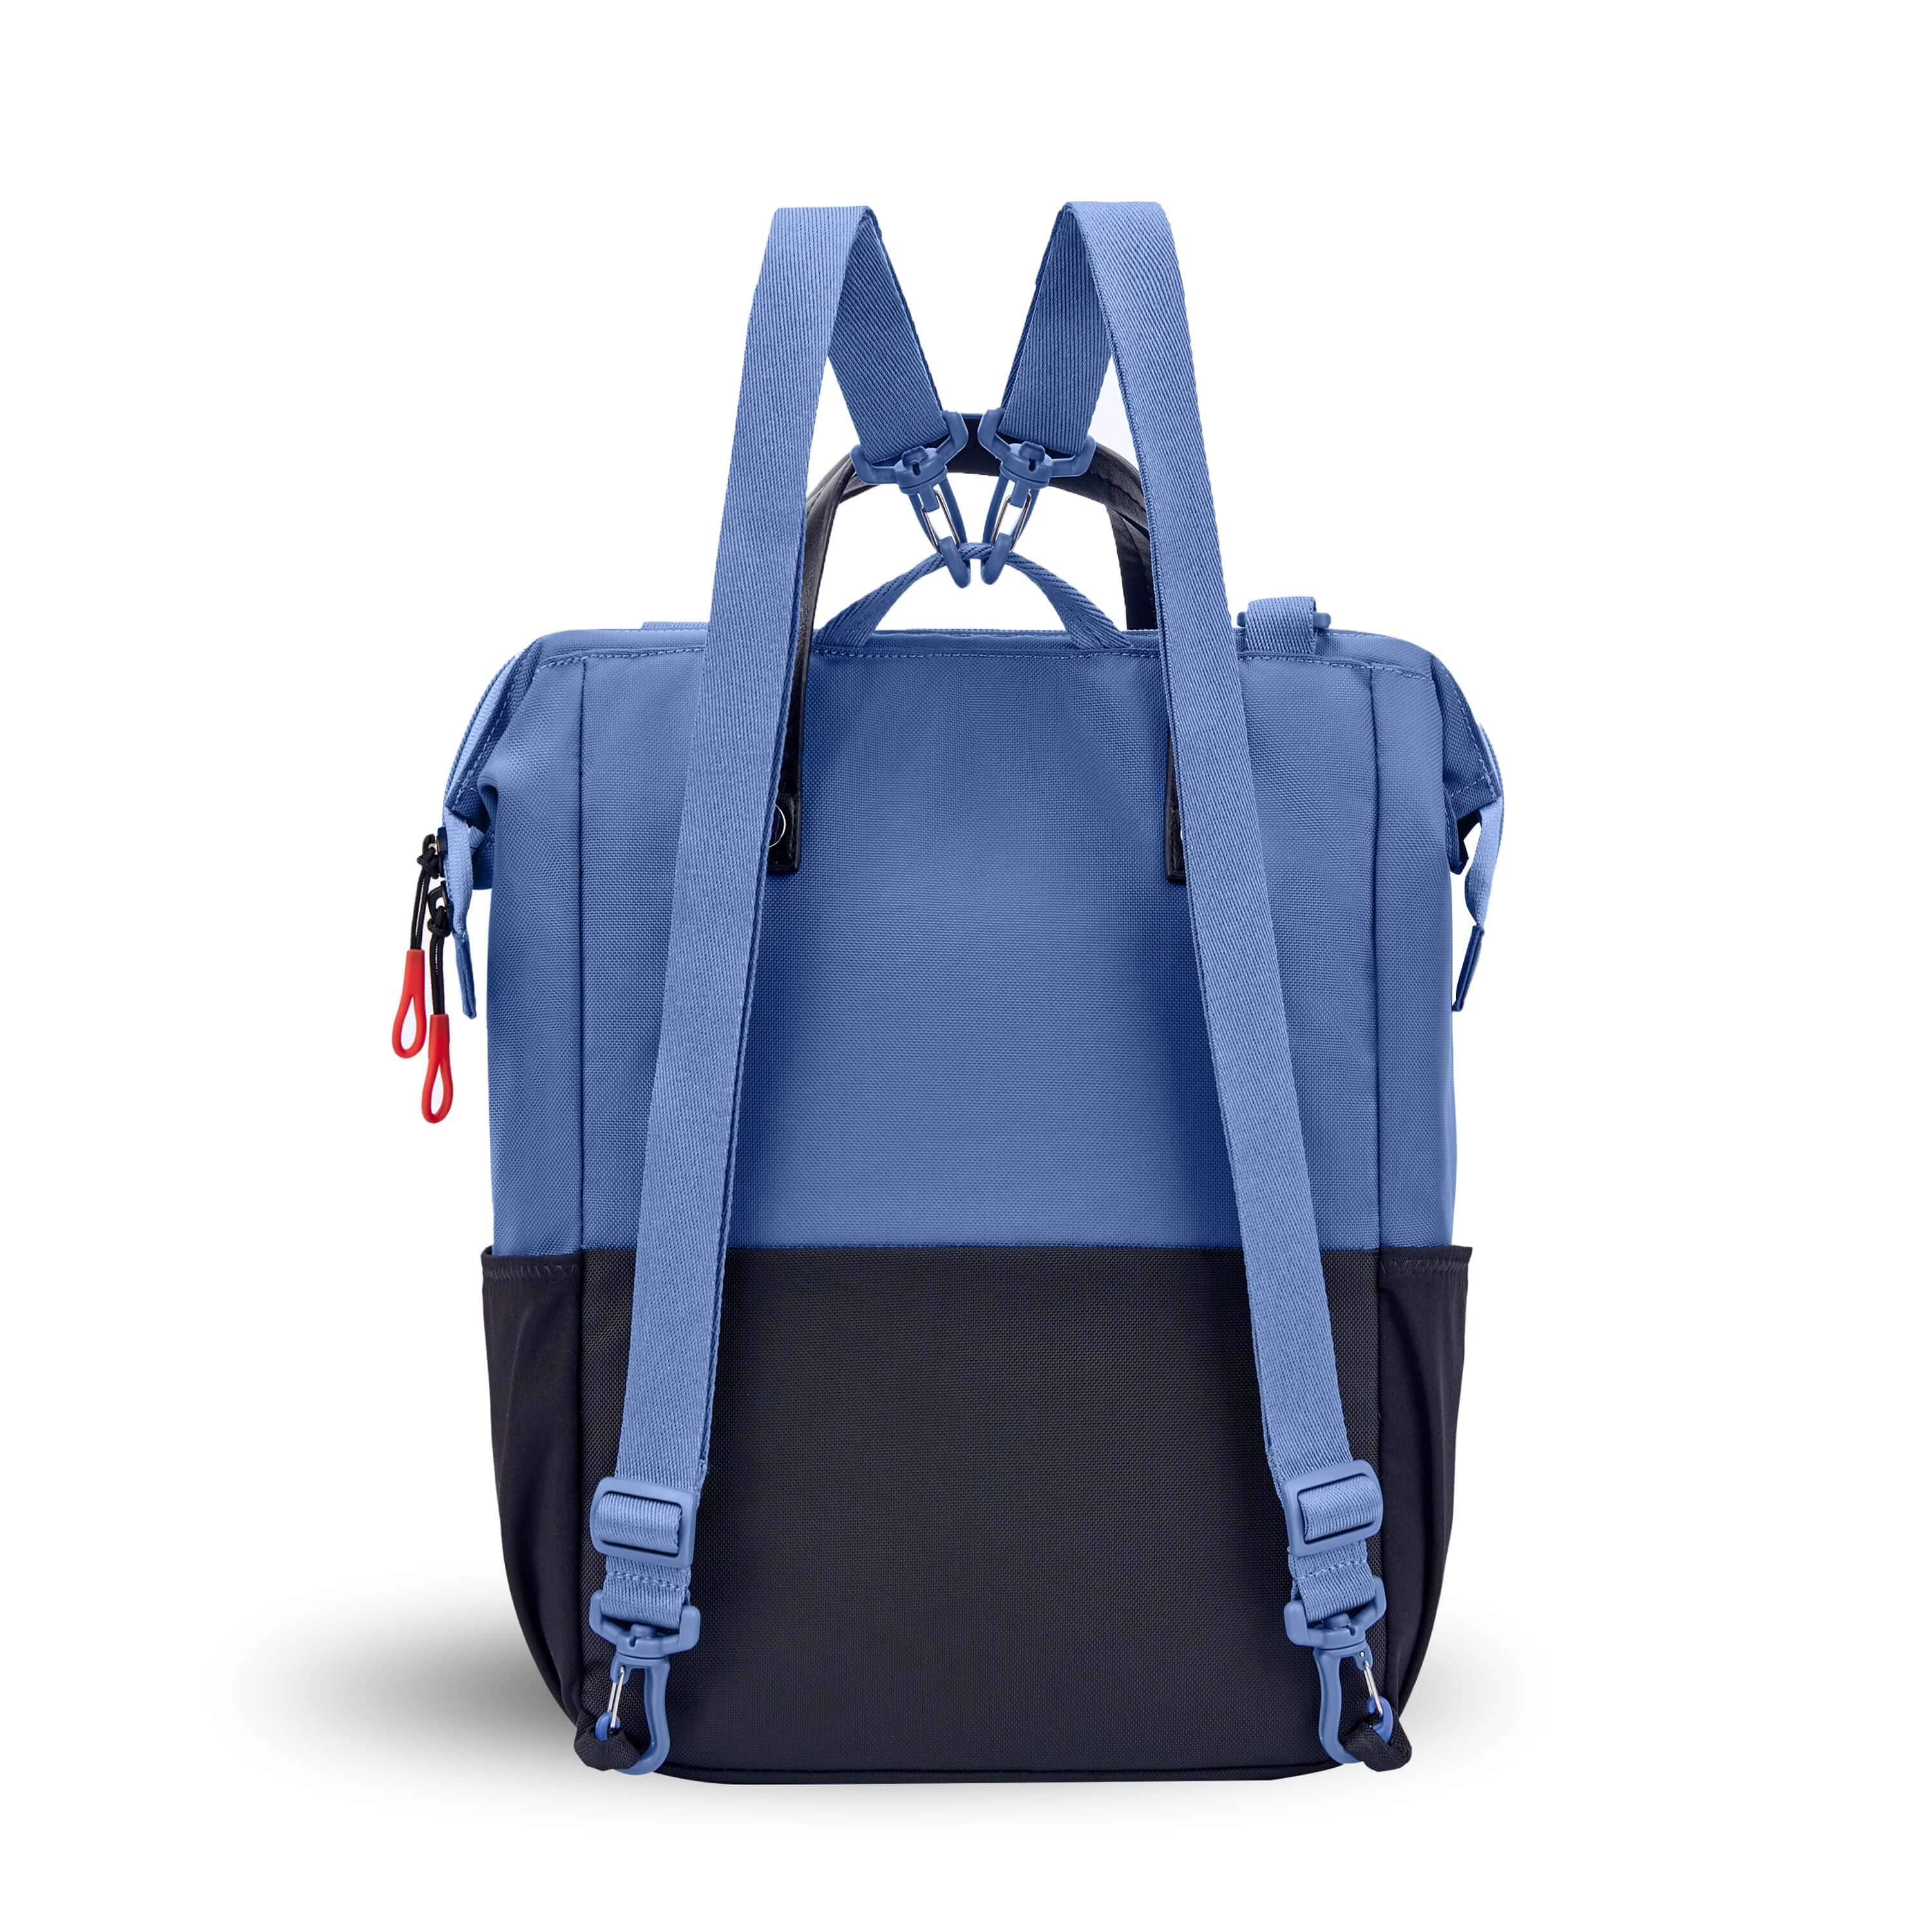 Back view of Sherpani three-in-one bag, the Dispatch in Pacific Blue. The detachable straps are shown in the backpack style.